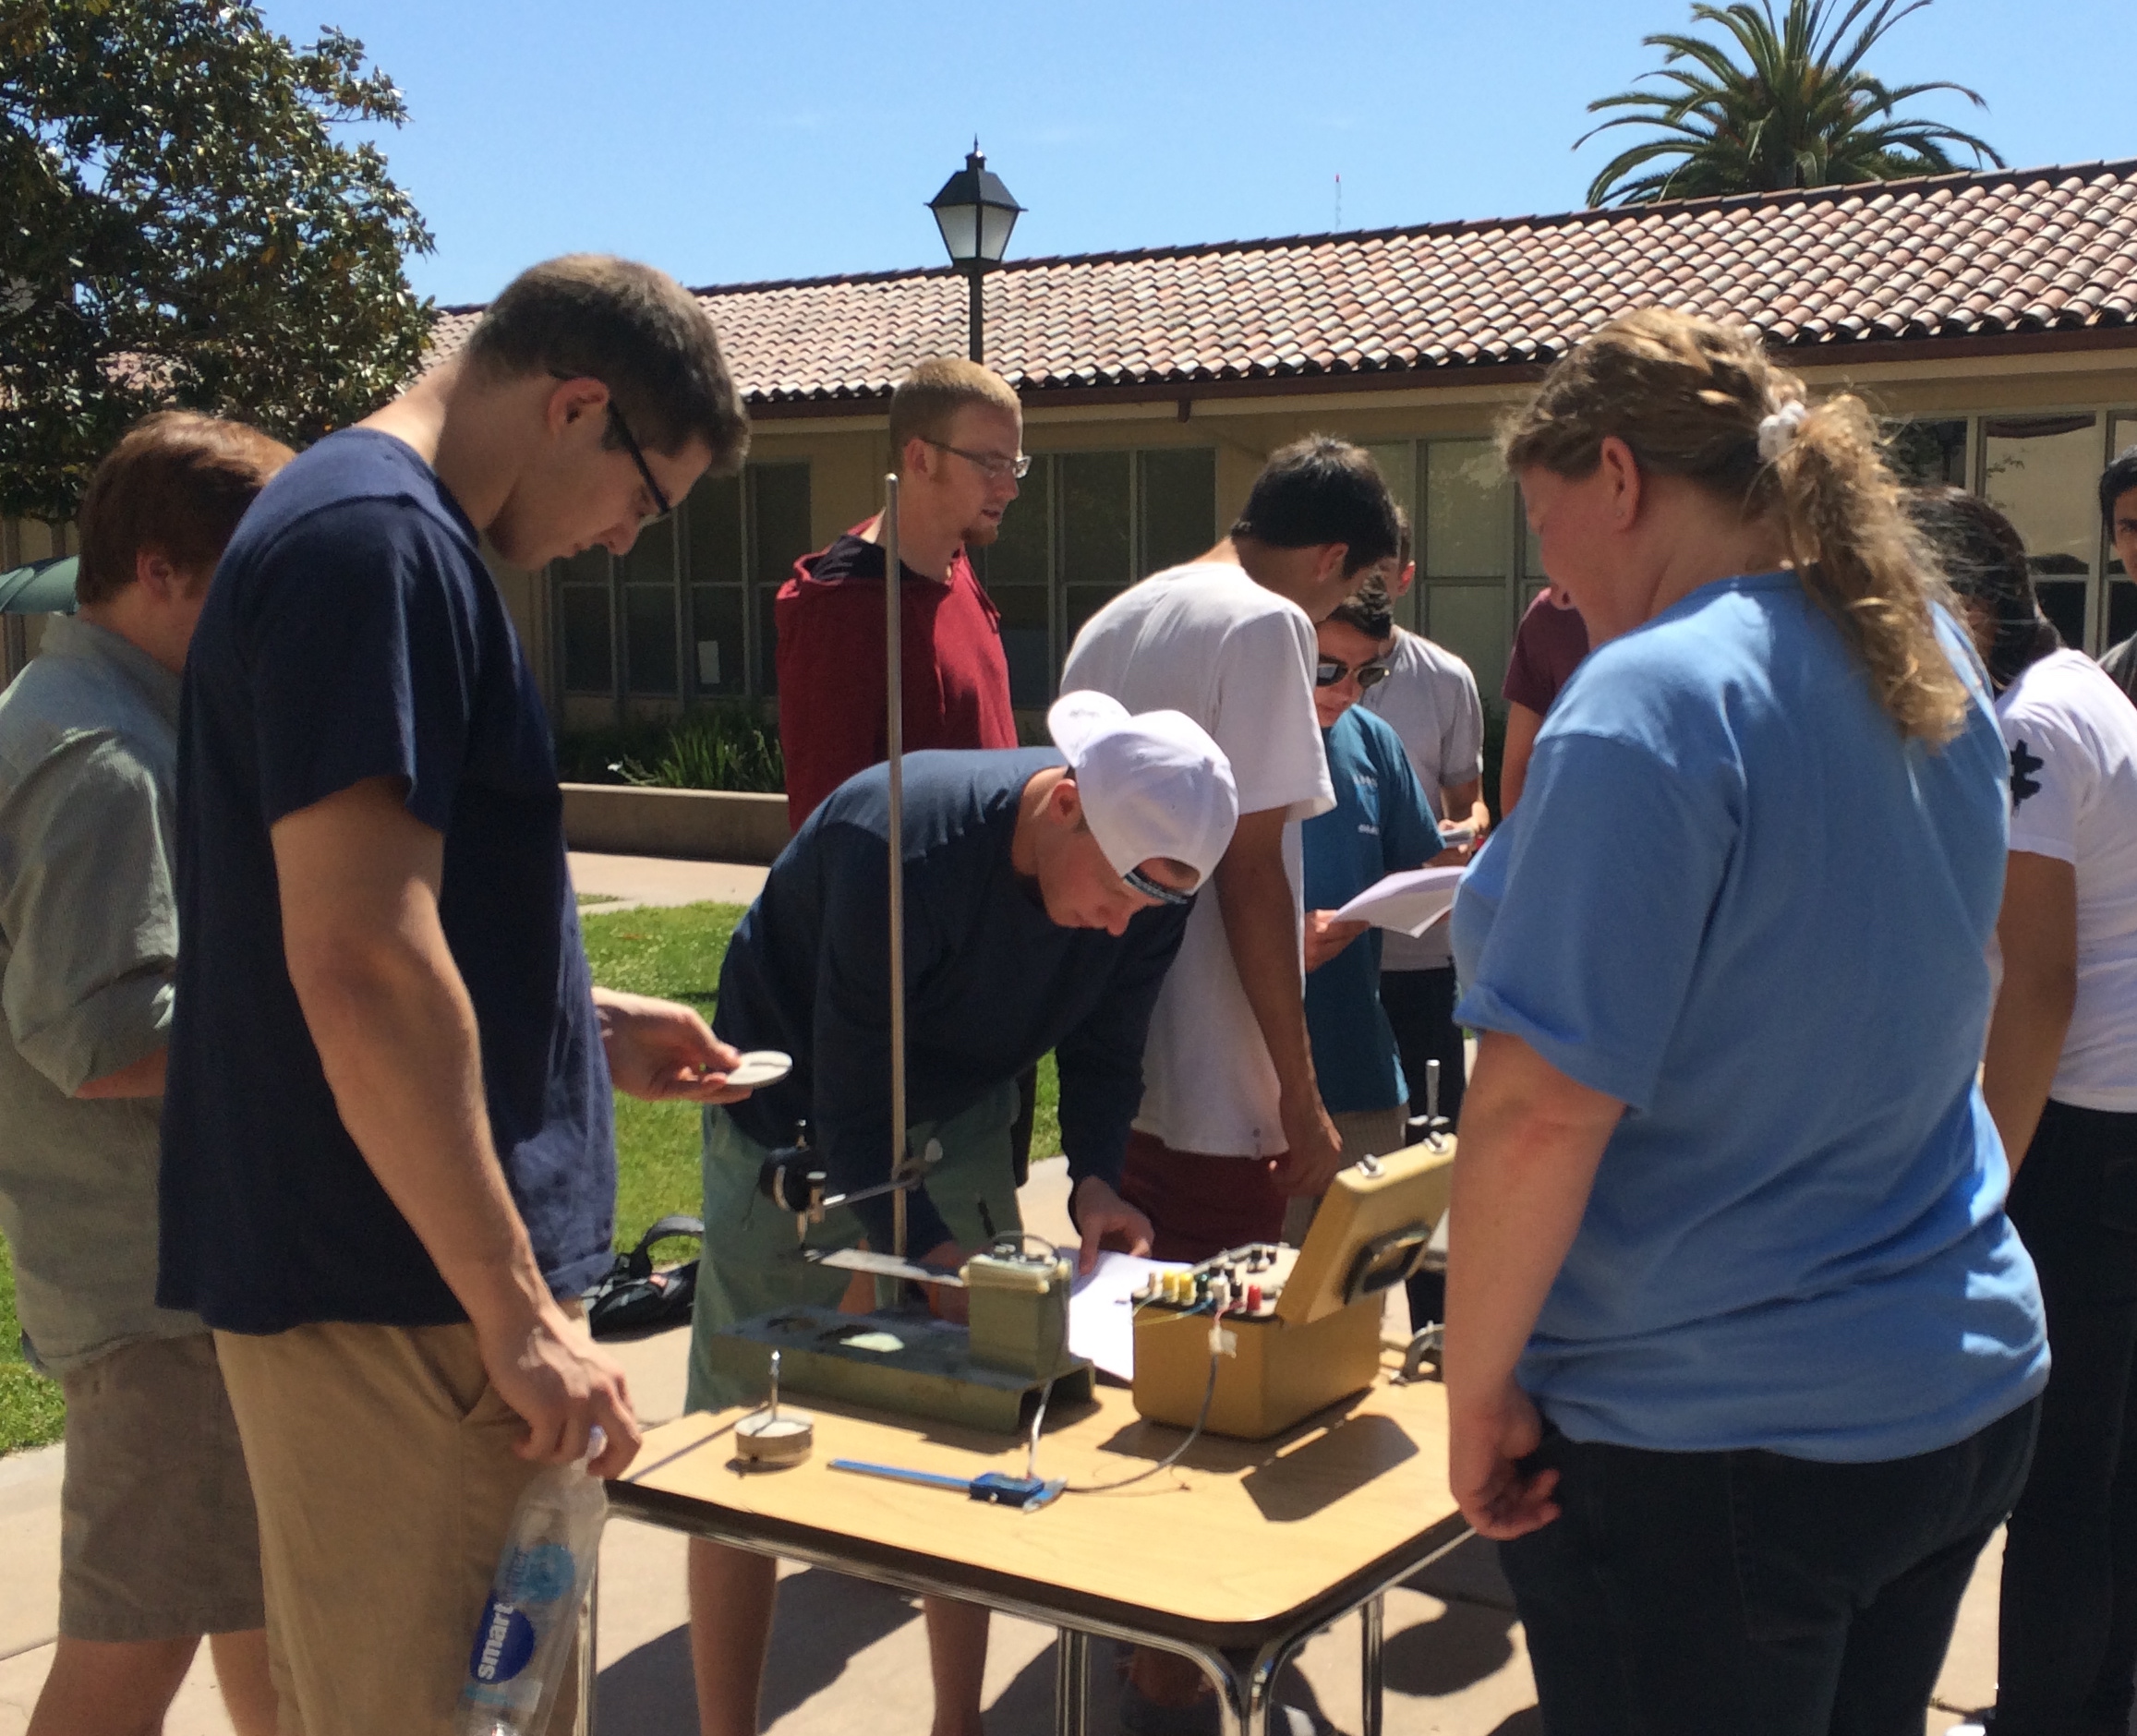 Students and professor working on an experiment in the quad.